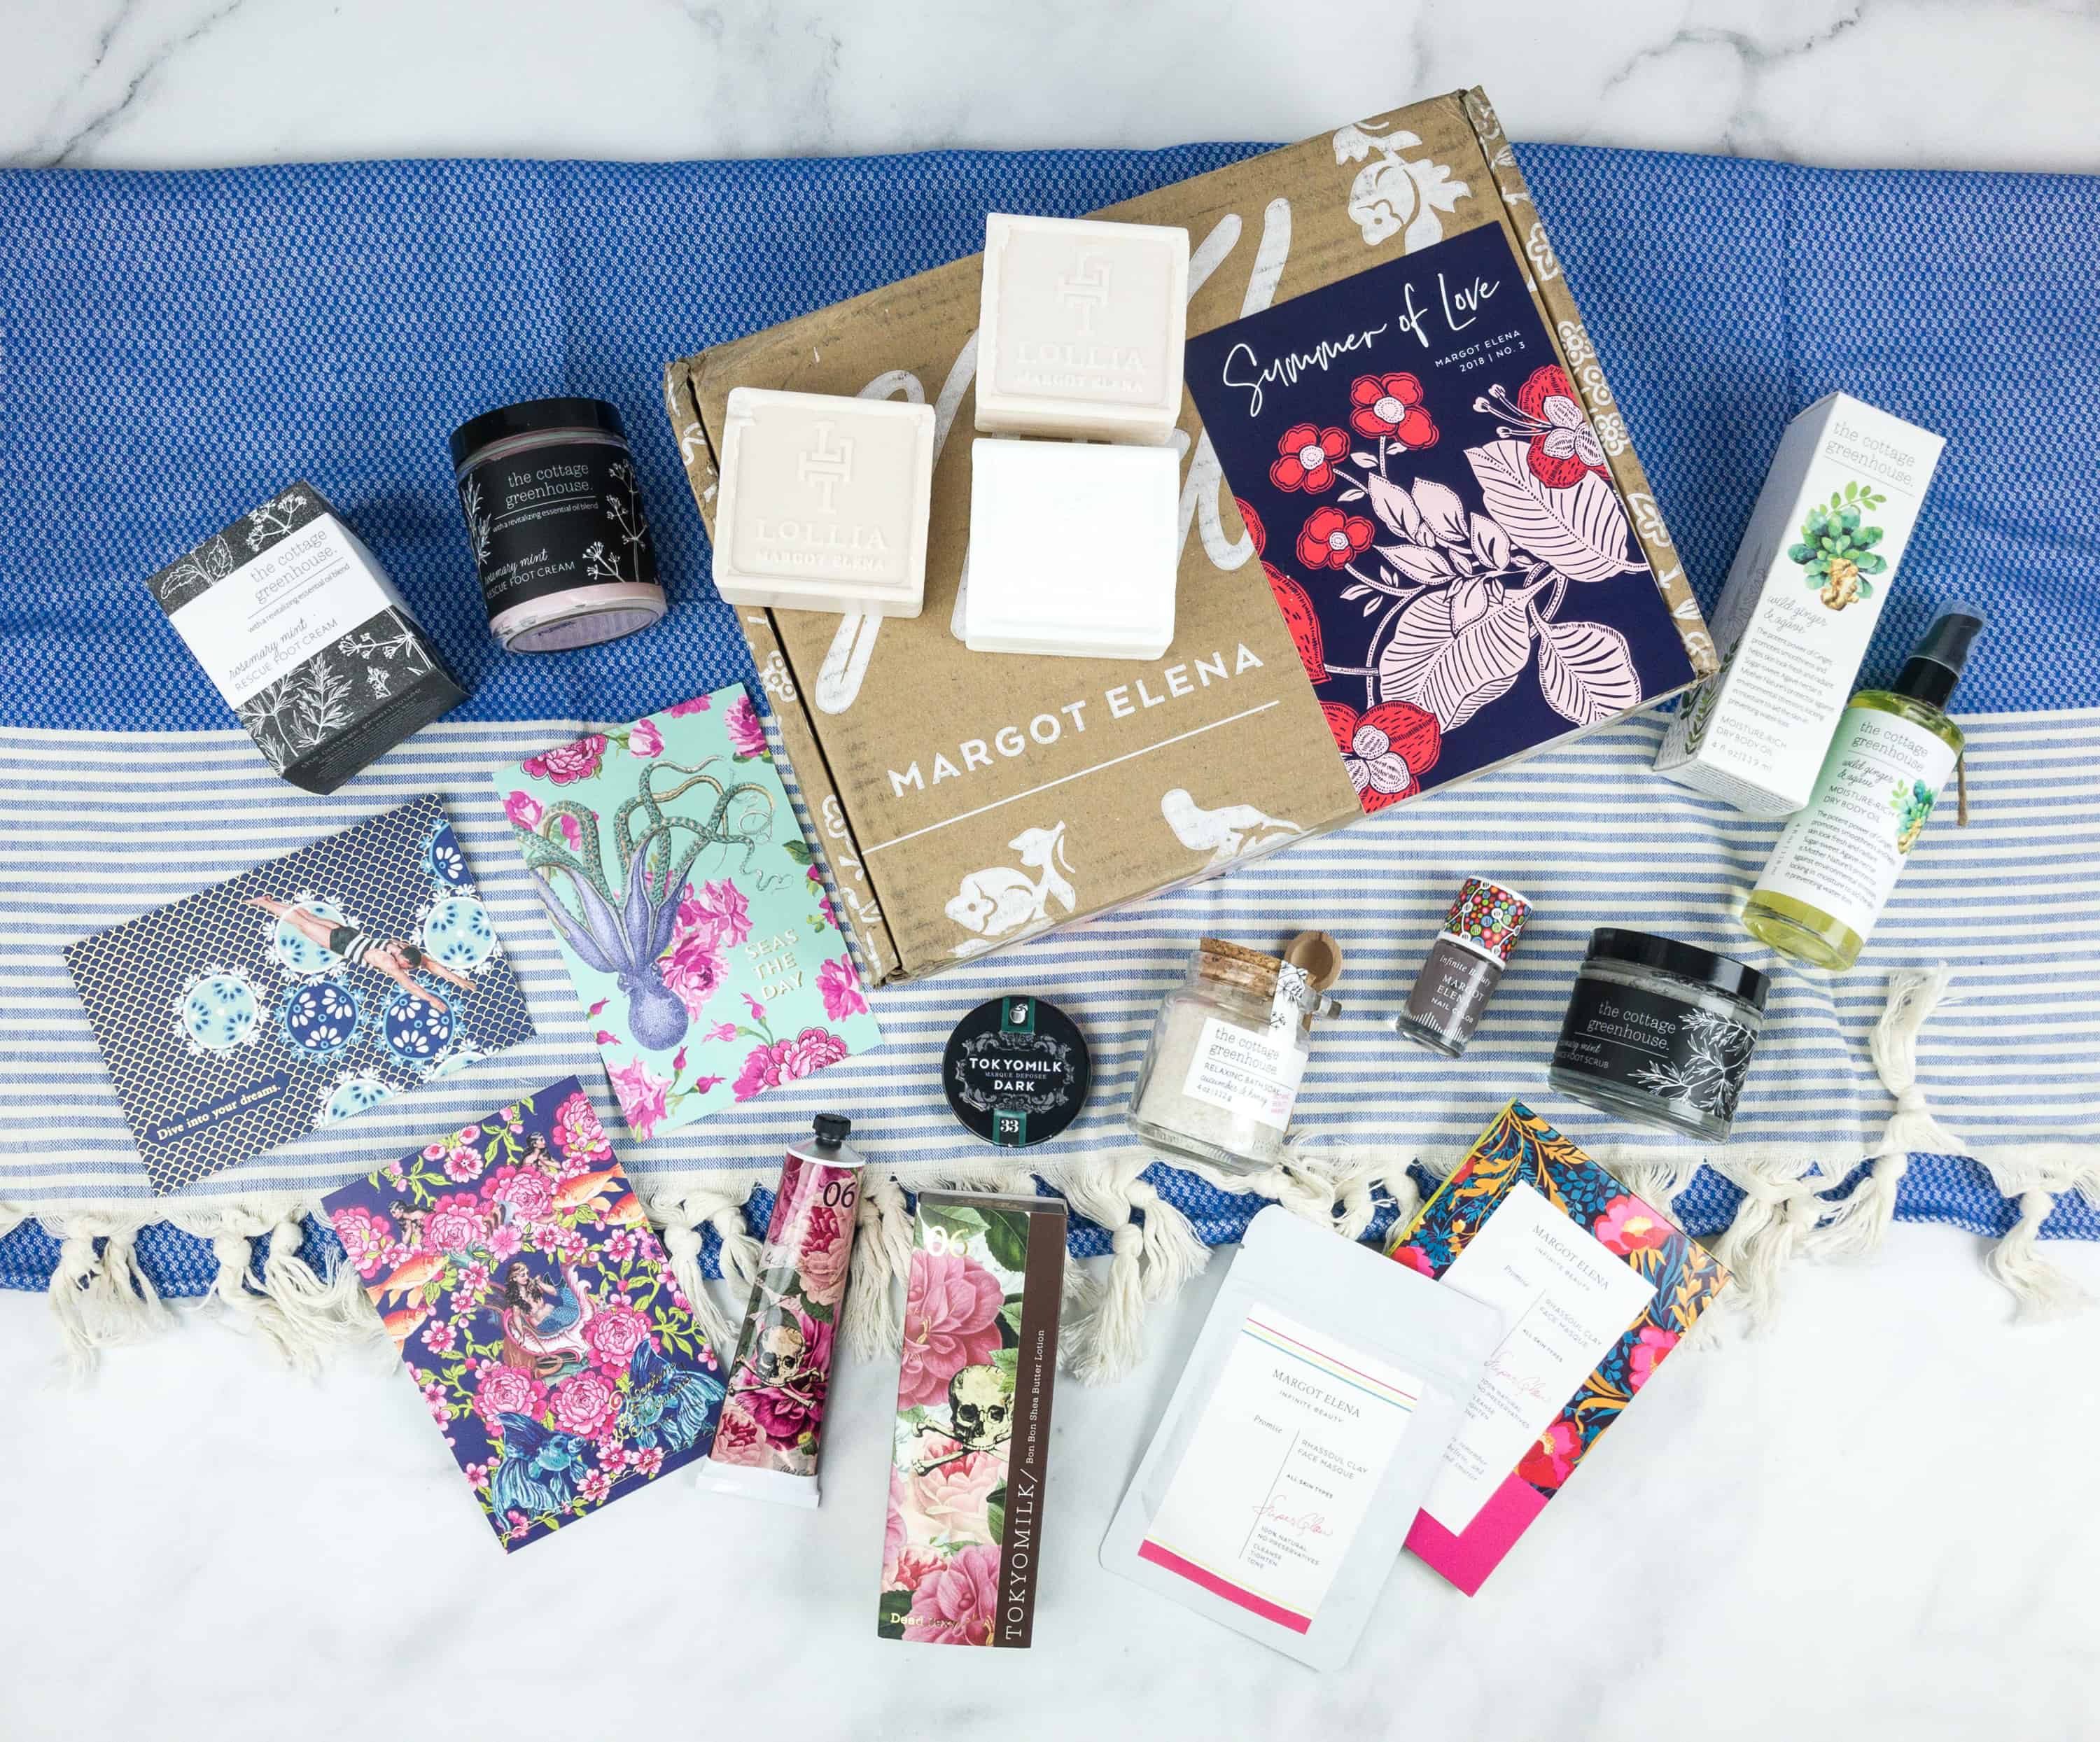 Margot Elena Discovery Box Review - Summer 2018.